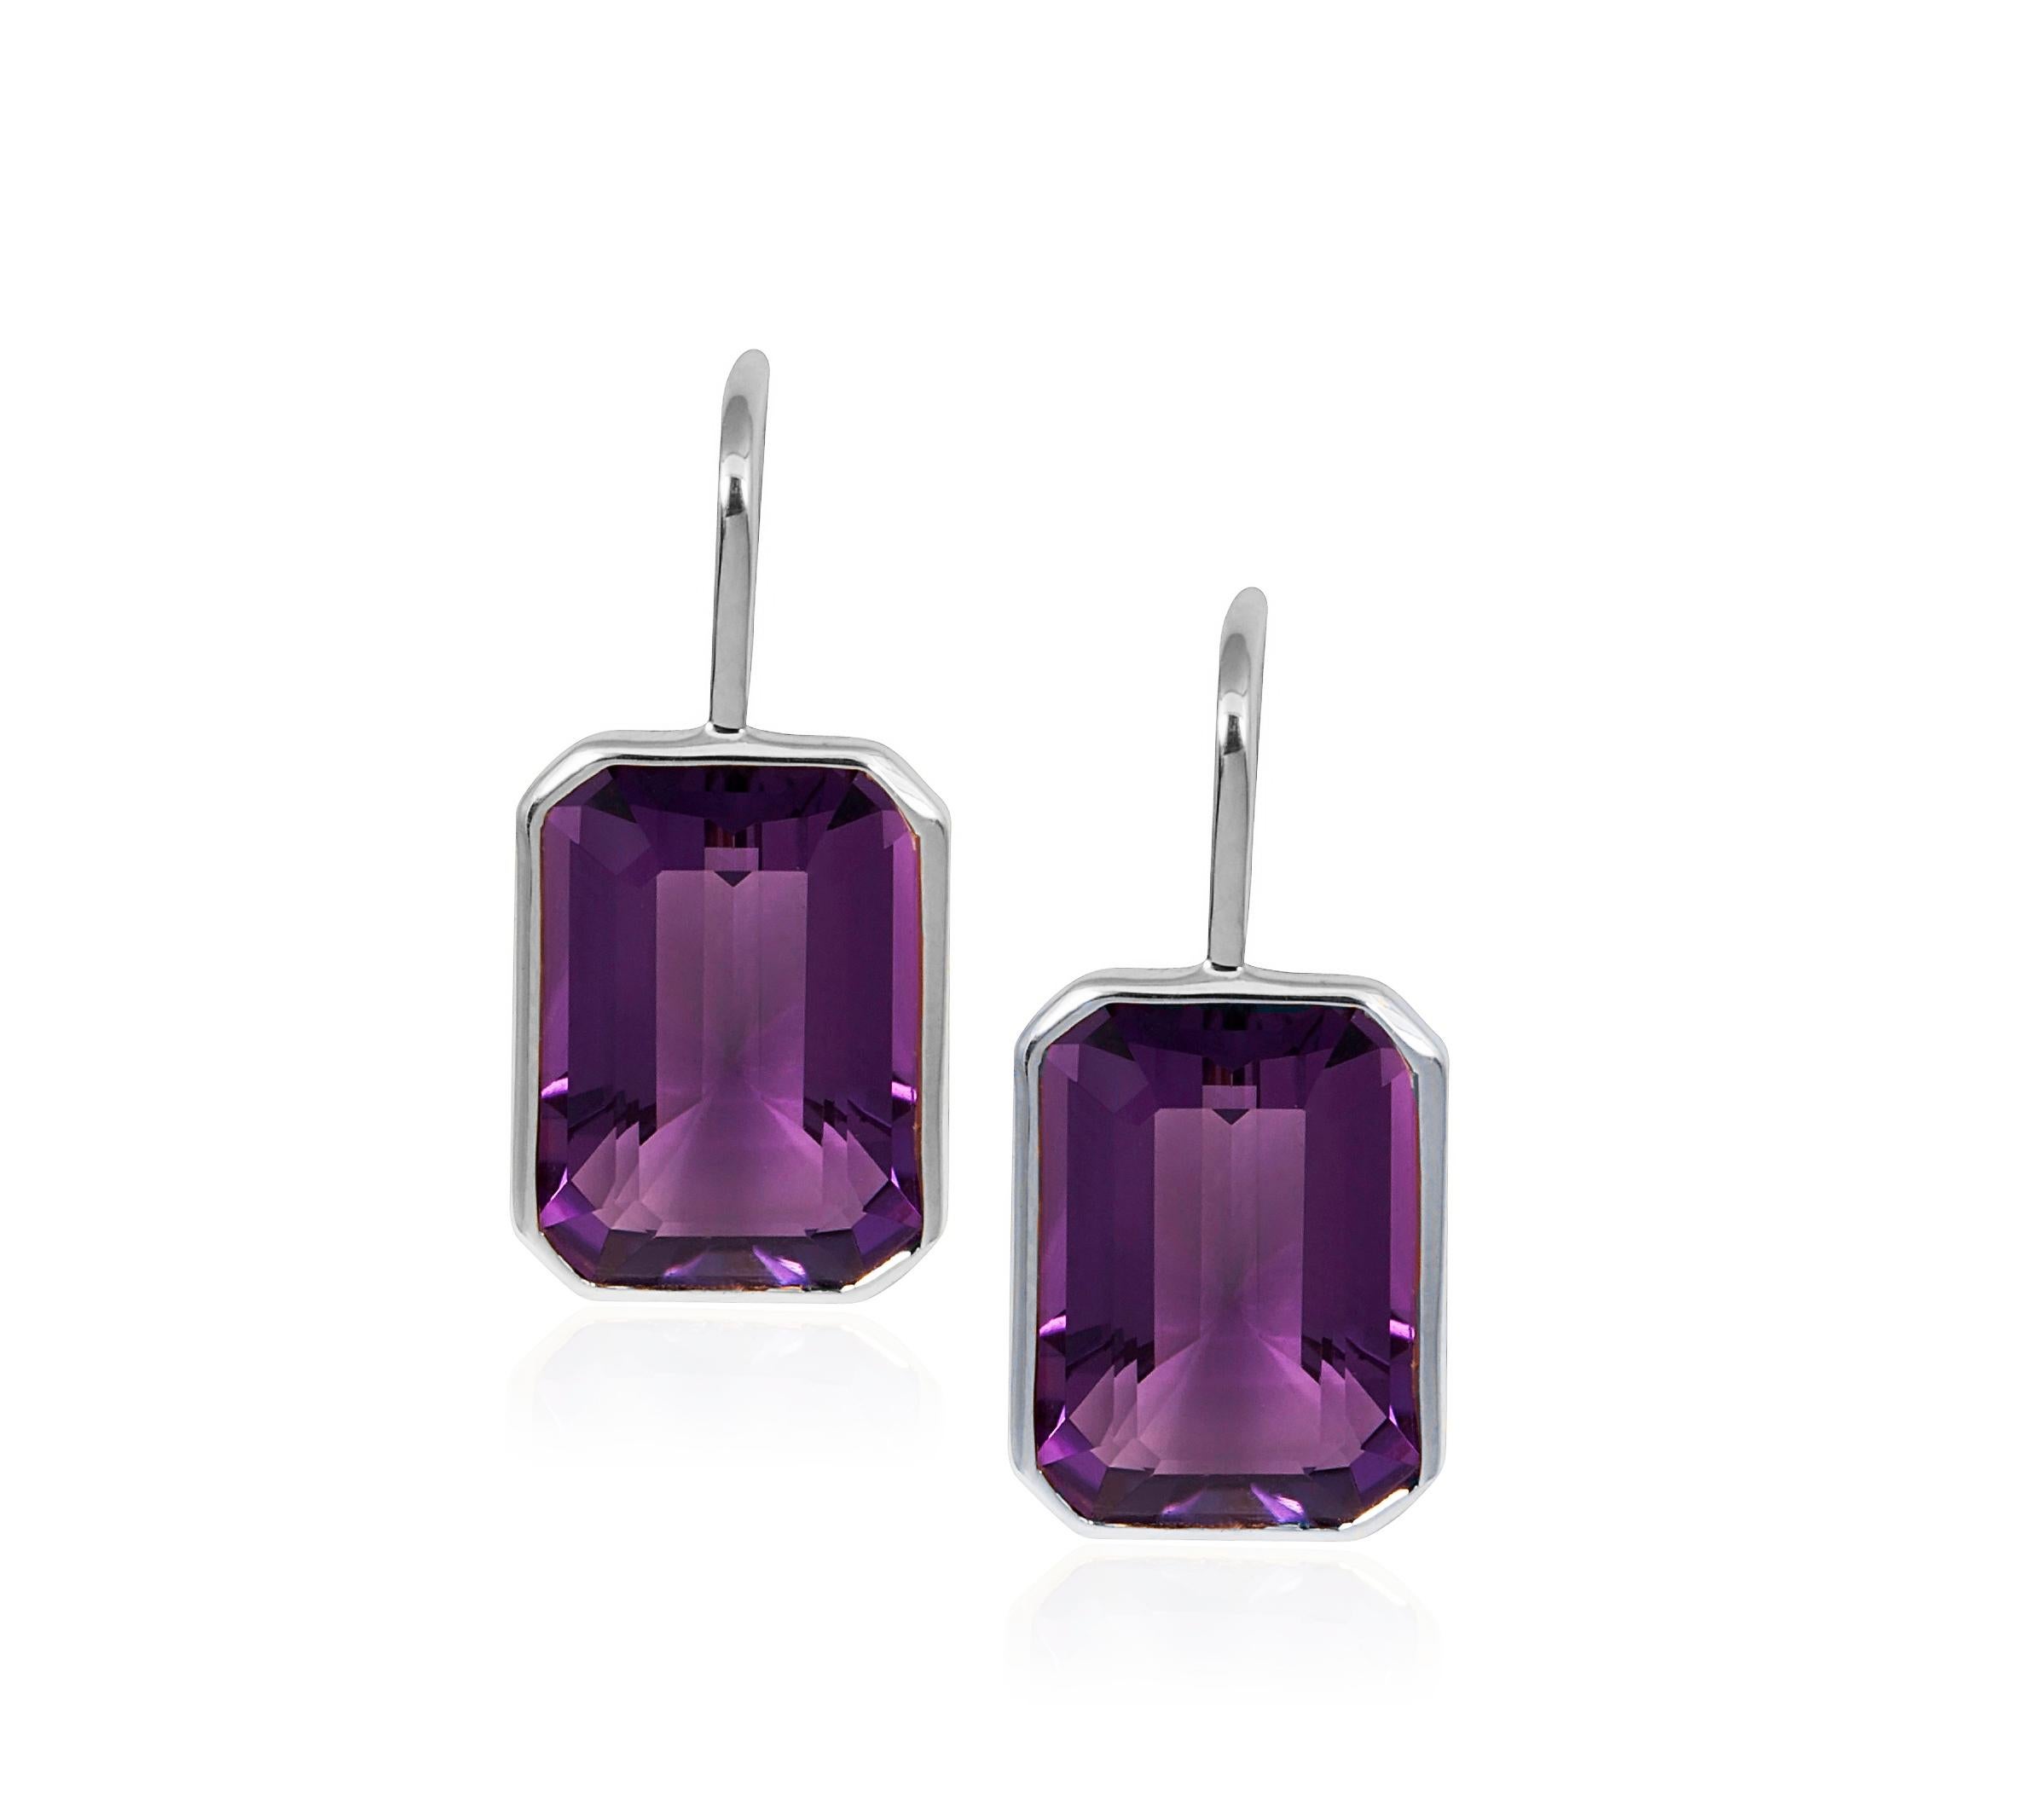 Amethyst Emerald Cut Earrings on Wire in 18K White Gold from 'Gossip' Collection

Stone Size: 15 x 10 mm